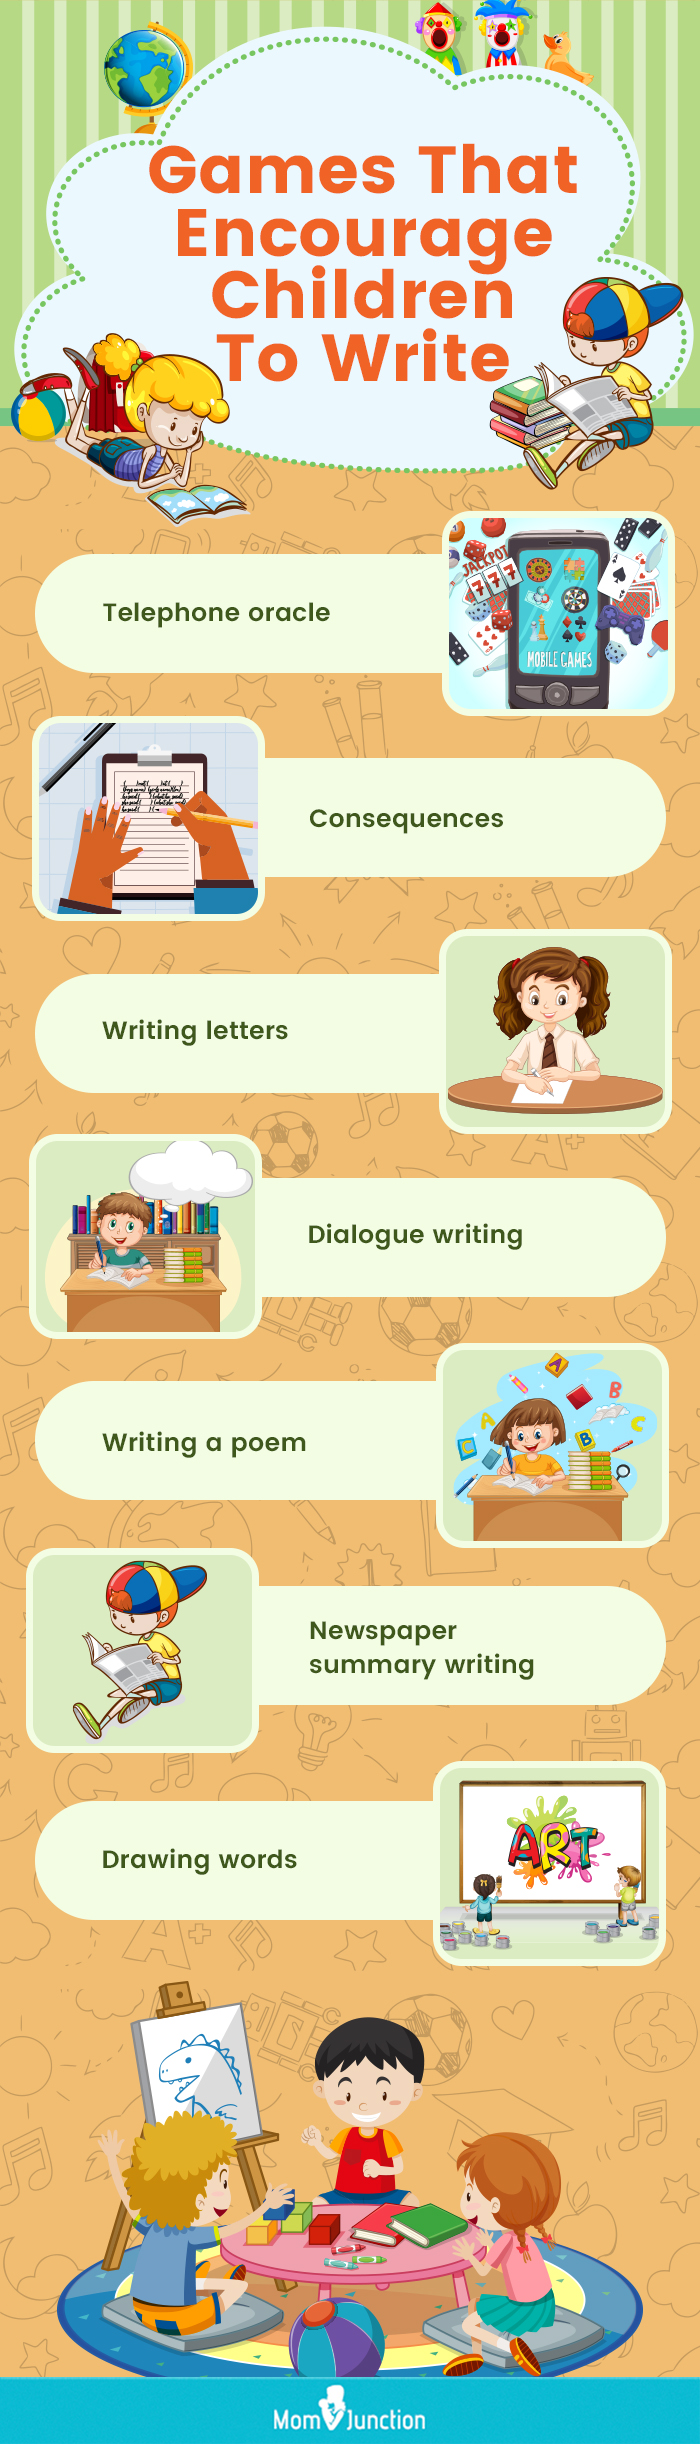 games that encourage children to write (infographic)